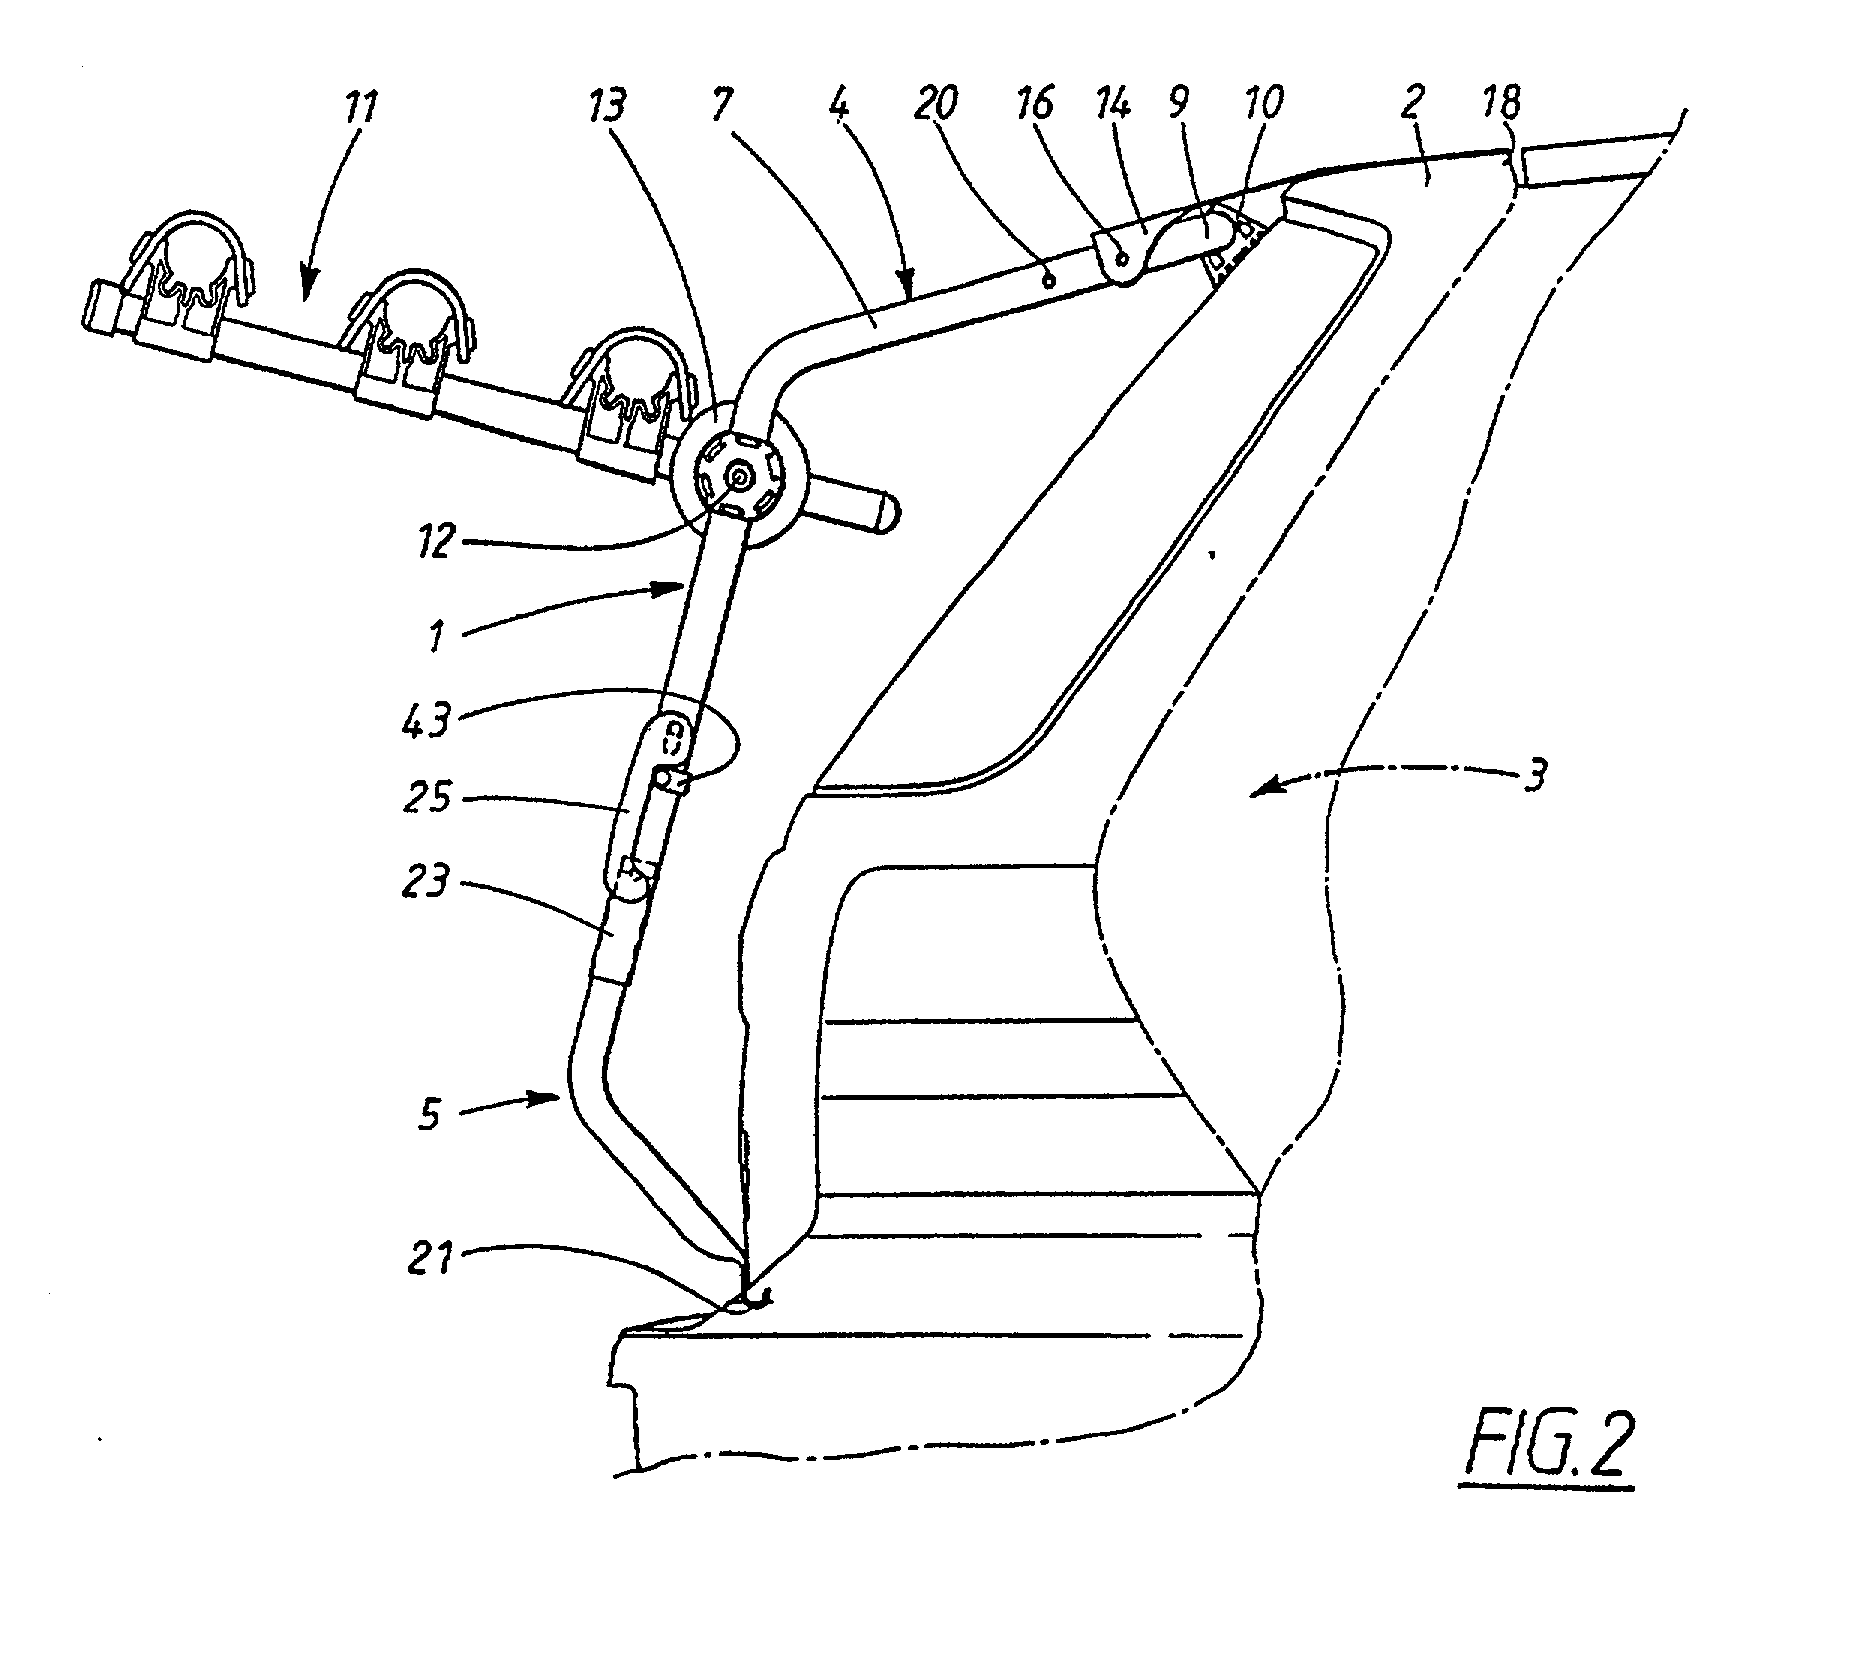 Vehicle-mounted load carrier